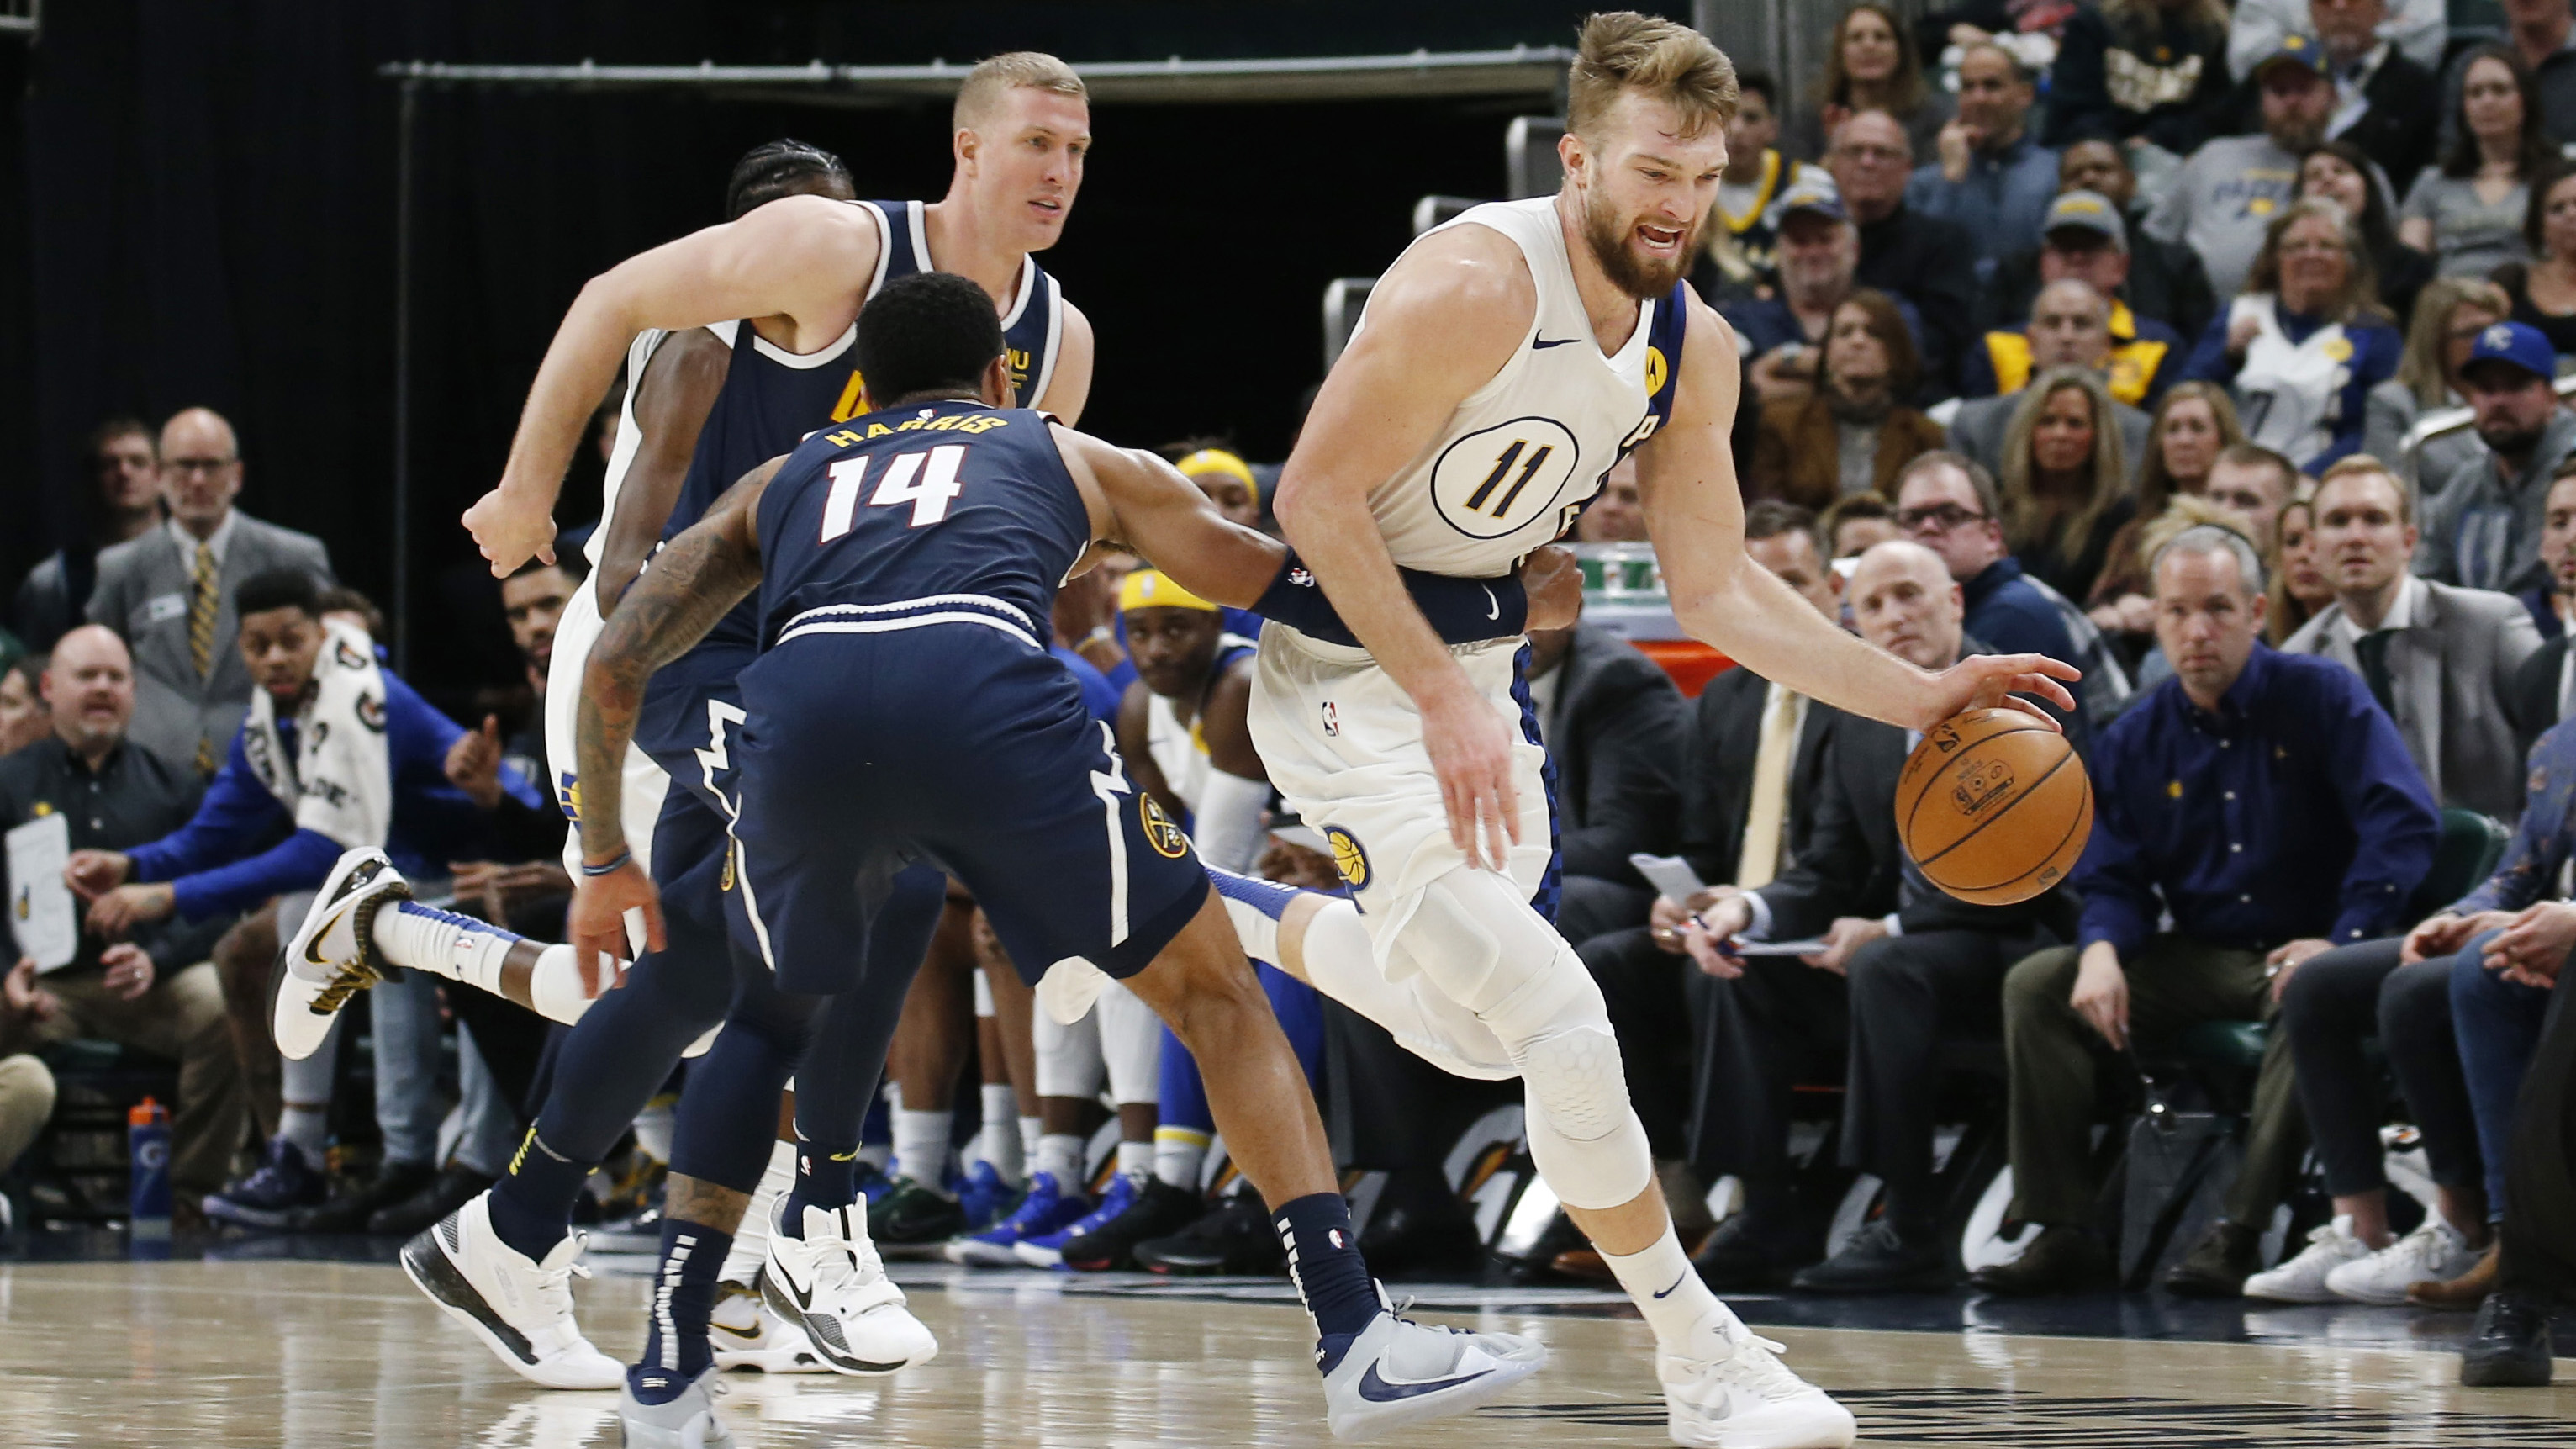 Pacers struggle after halftime, fall 124-116 to Nuggets